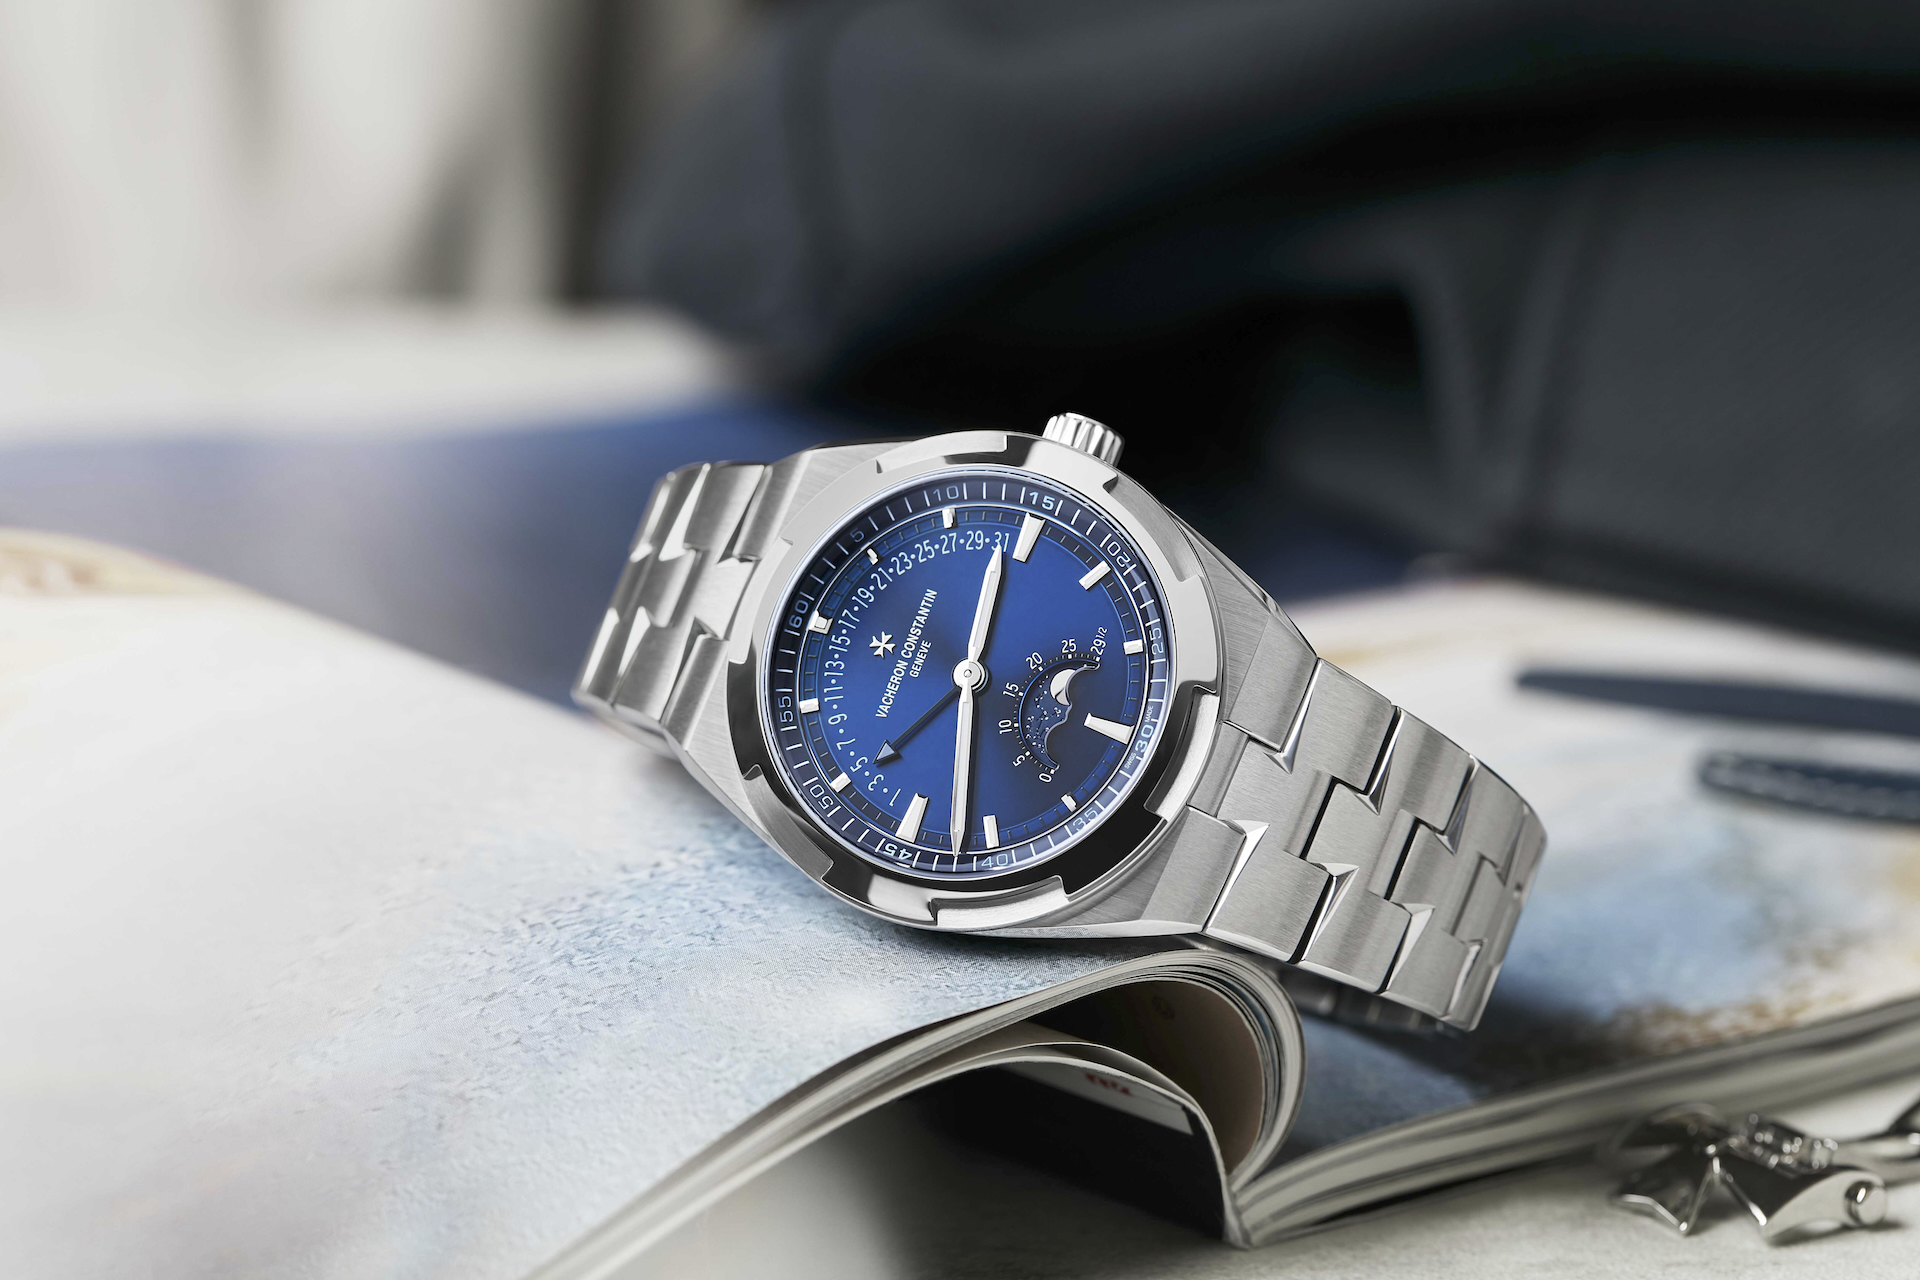 What could make the Vacheron Constantin Overseas even better? How